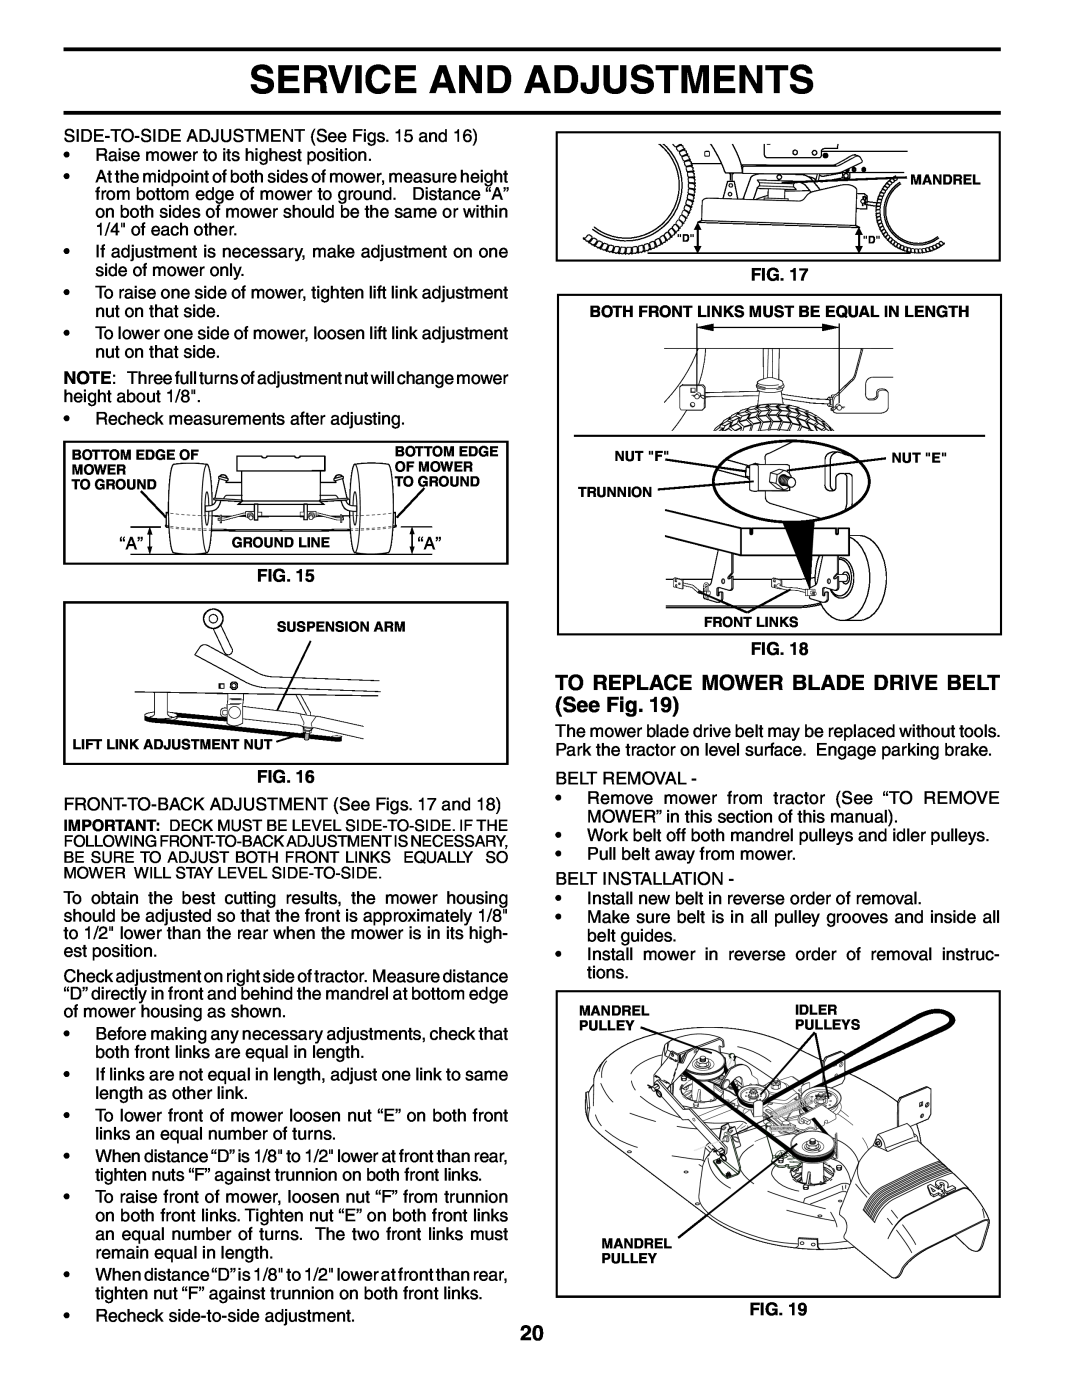 Poulan 194563 manual TO REPLACE MOWER BLADE DRIVE BELT See Fig, Service And Adjustments 